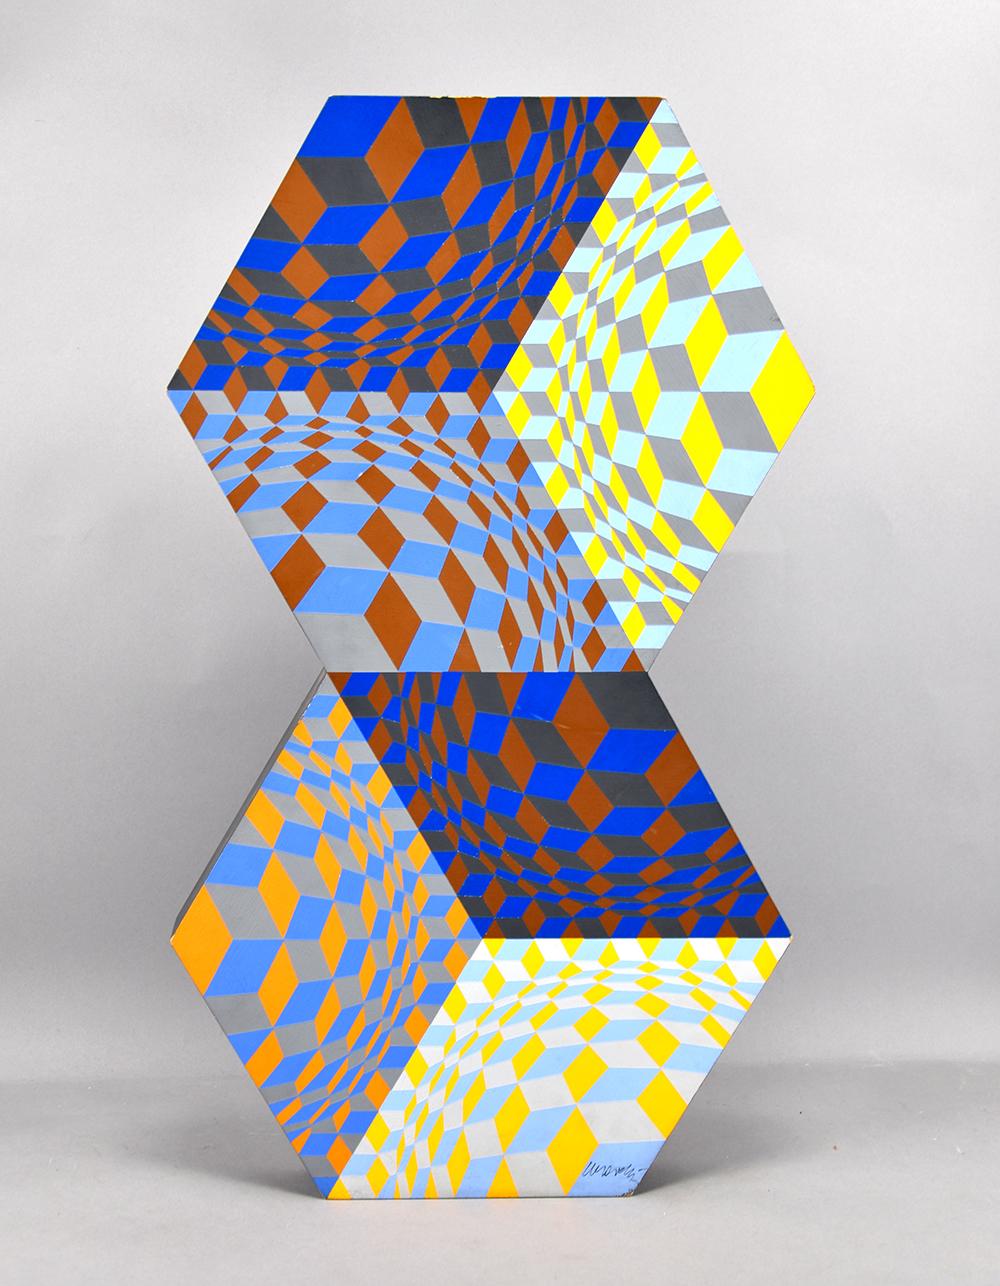 Kettes, 1984 - Sculpture by Victor Vasarely